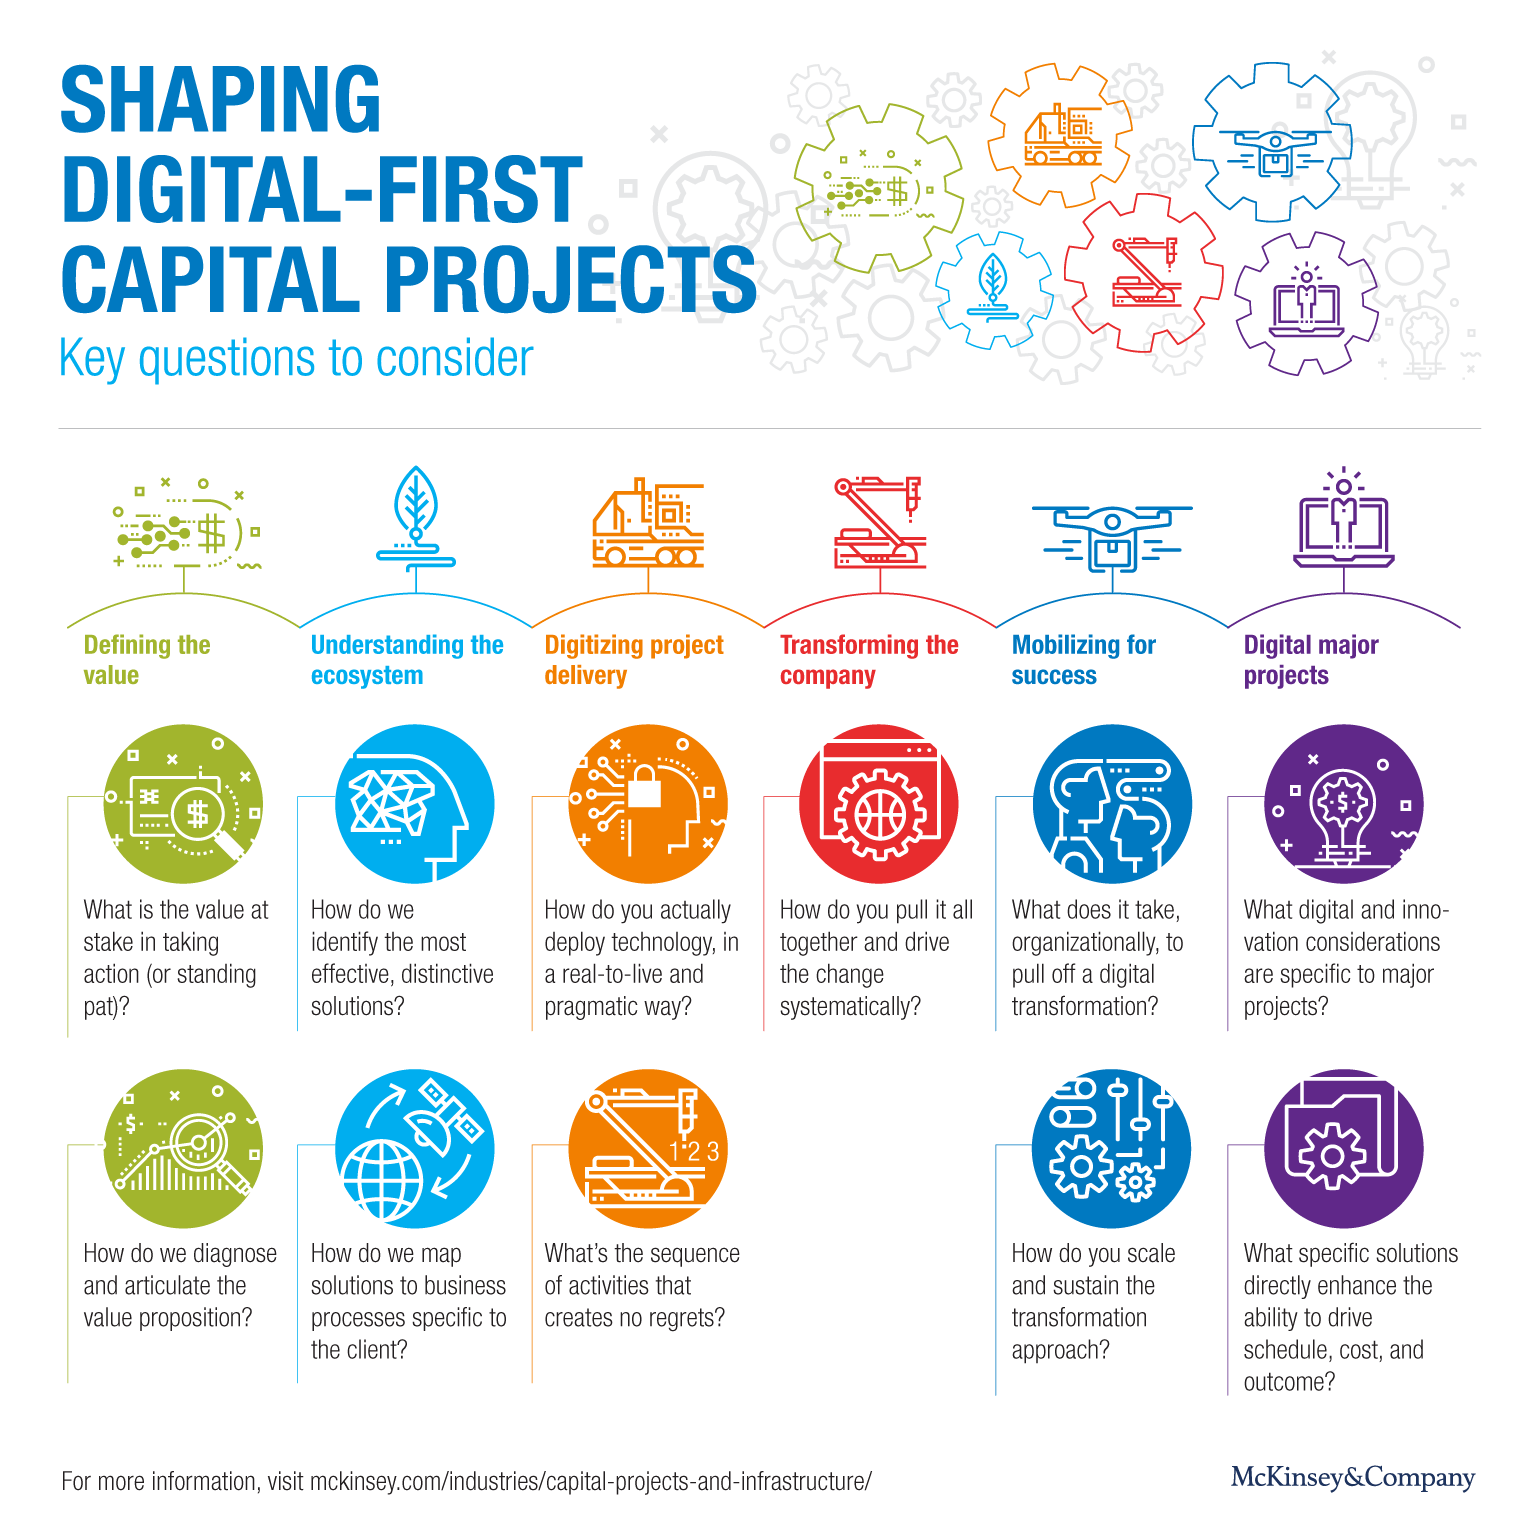 Shaping digital-first capital projects: Key questions to consider